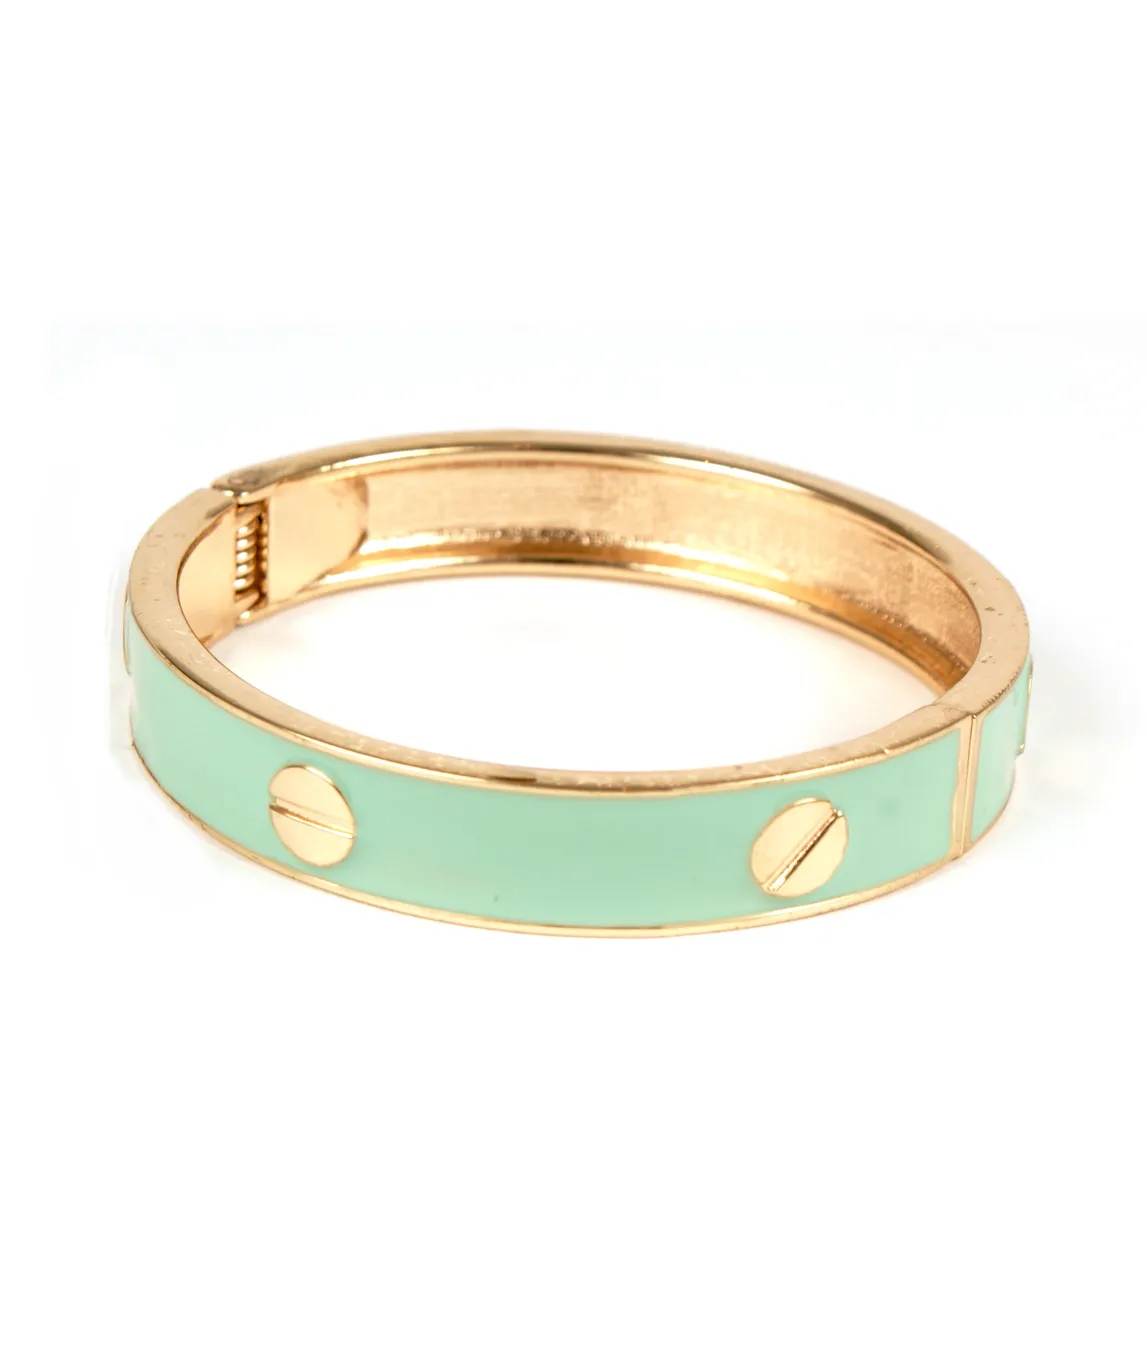 green bangle with cartier type design